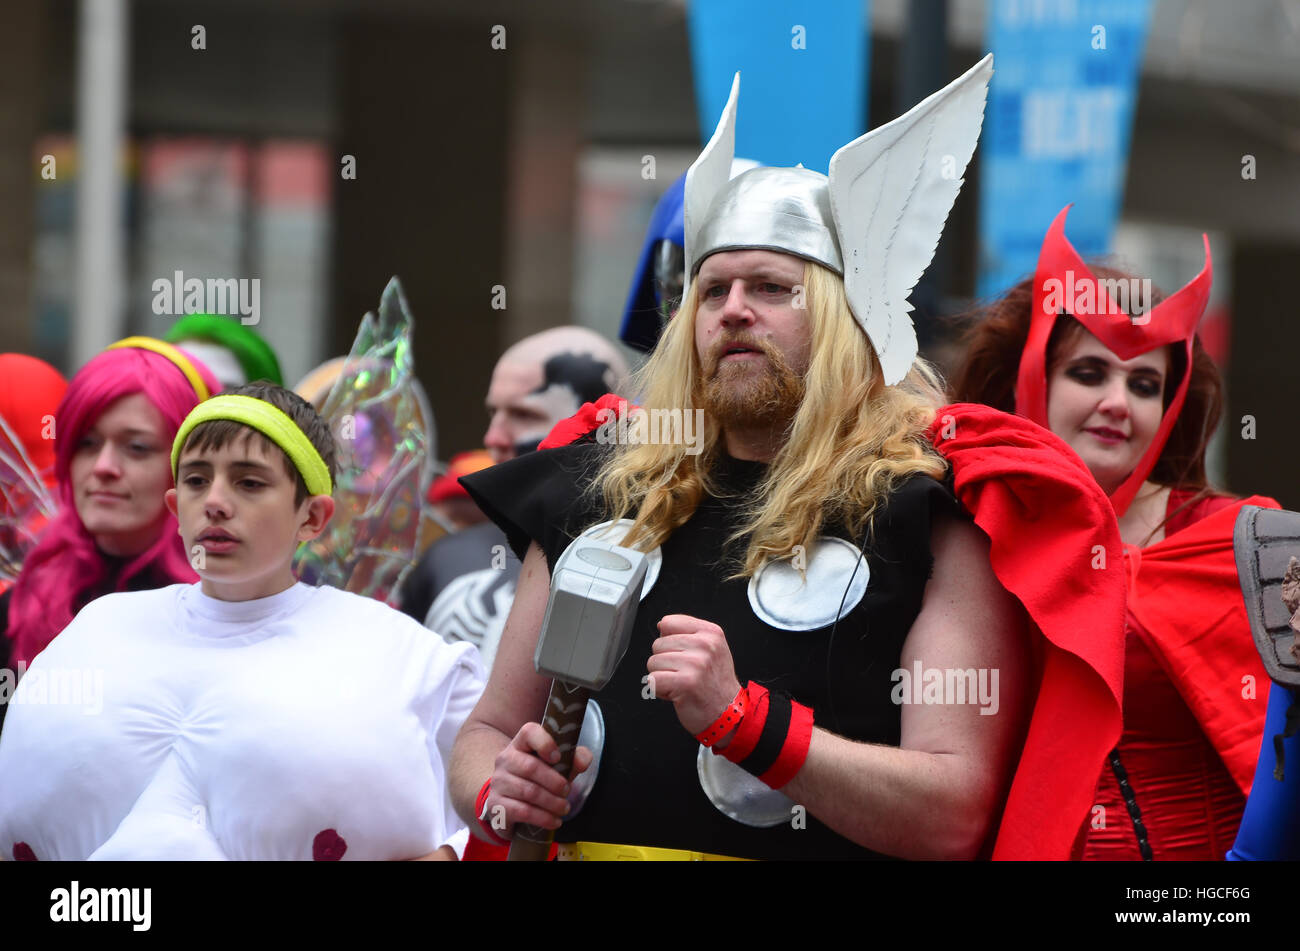 Calgary, Alberta, Canada, April 24 2014: Comic and Entertainment Expo Parade Thor of the Avengers cosplay dancing Stock Photo